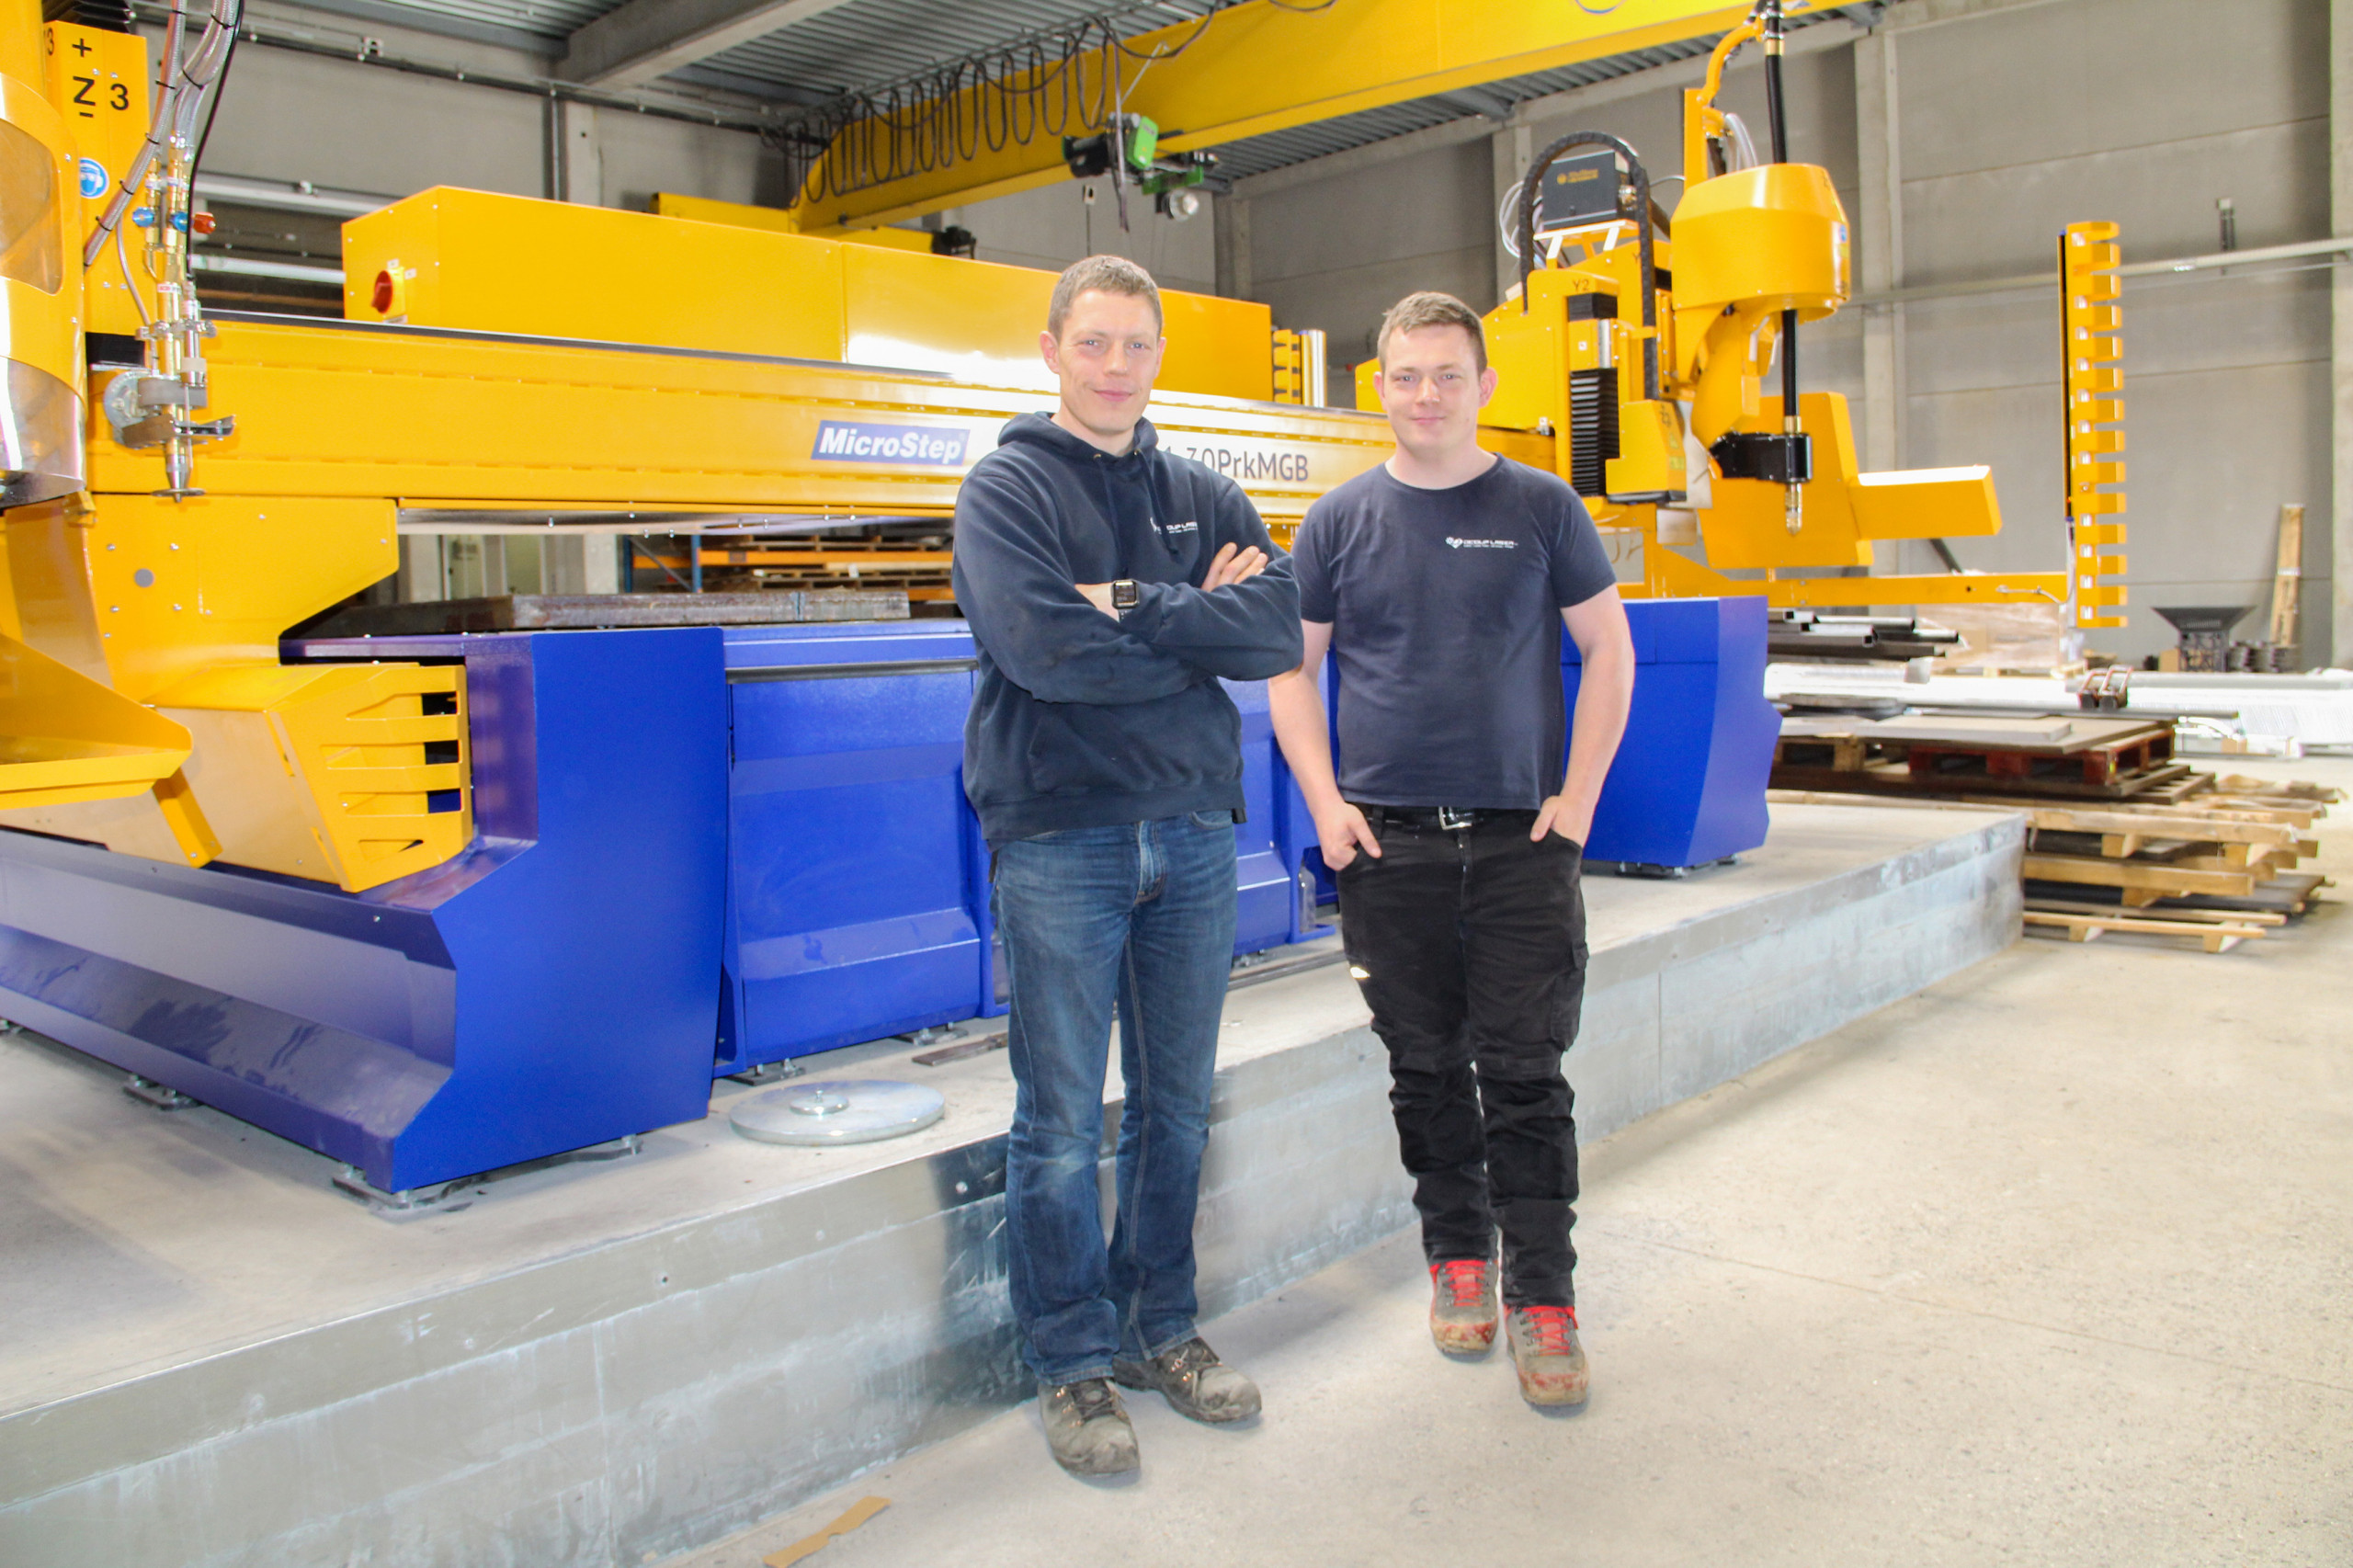 In 2010, the brothers Frédéric (left) and Cédric Demarche founded the metal service provider DCoup Laser S.A.: Since then, the company has developed successfully. The latest showpiece in the modern machine park is the MG from MicroStep. The decision for it was made quickly: 